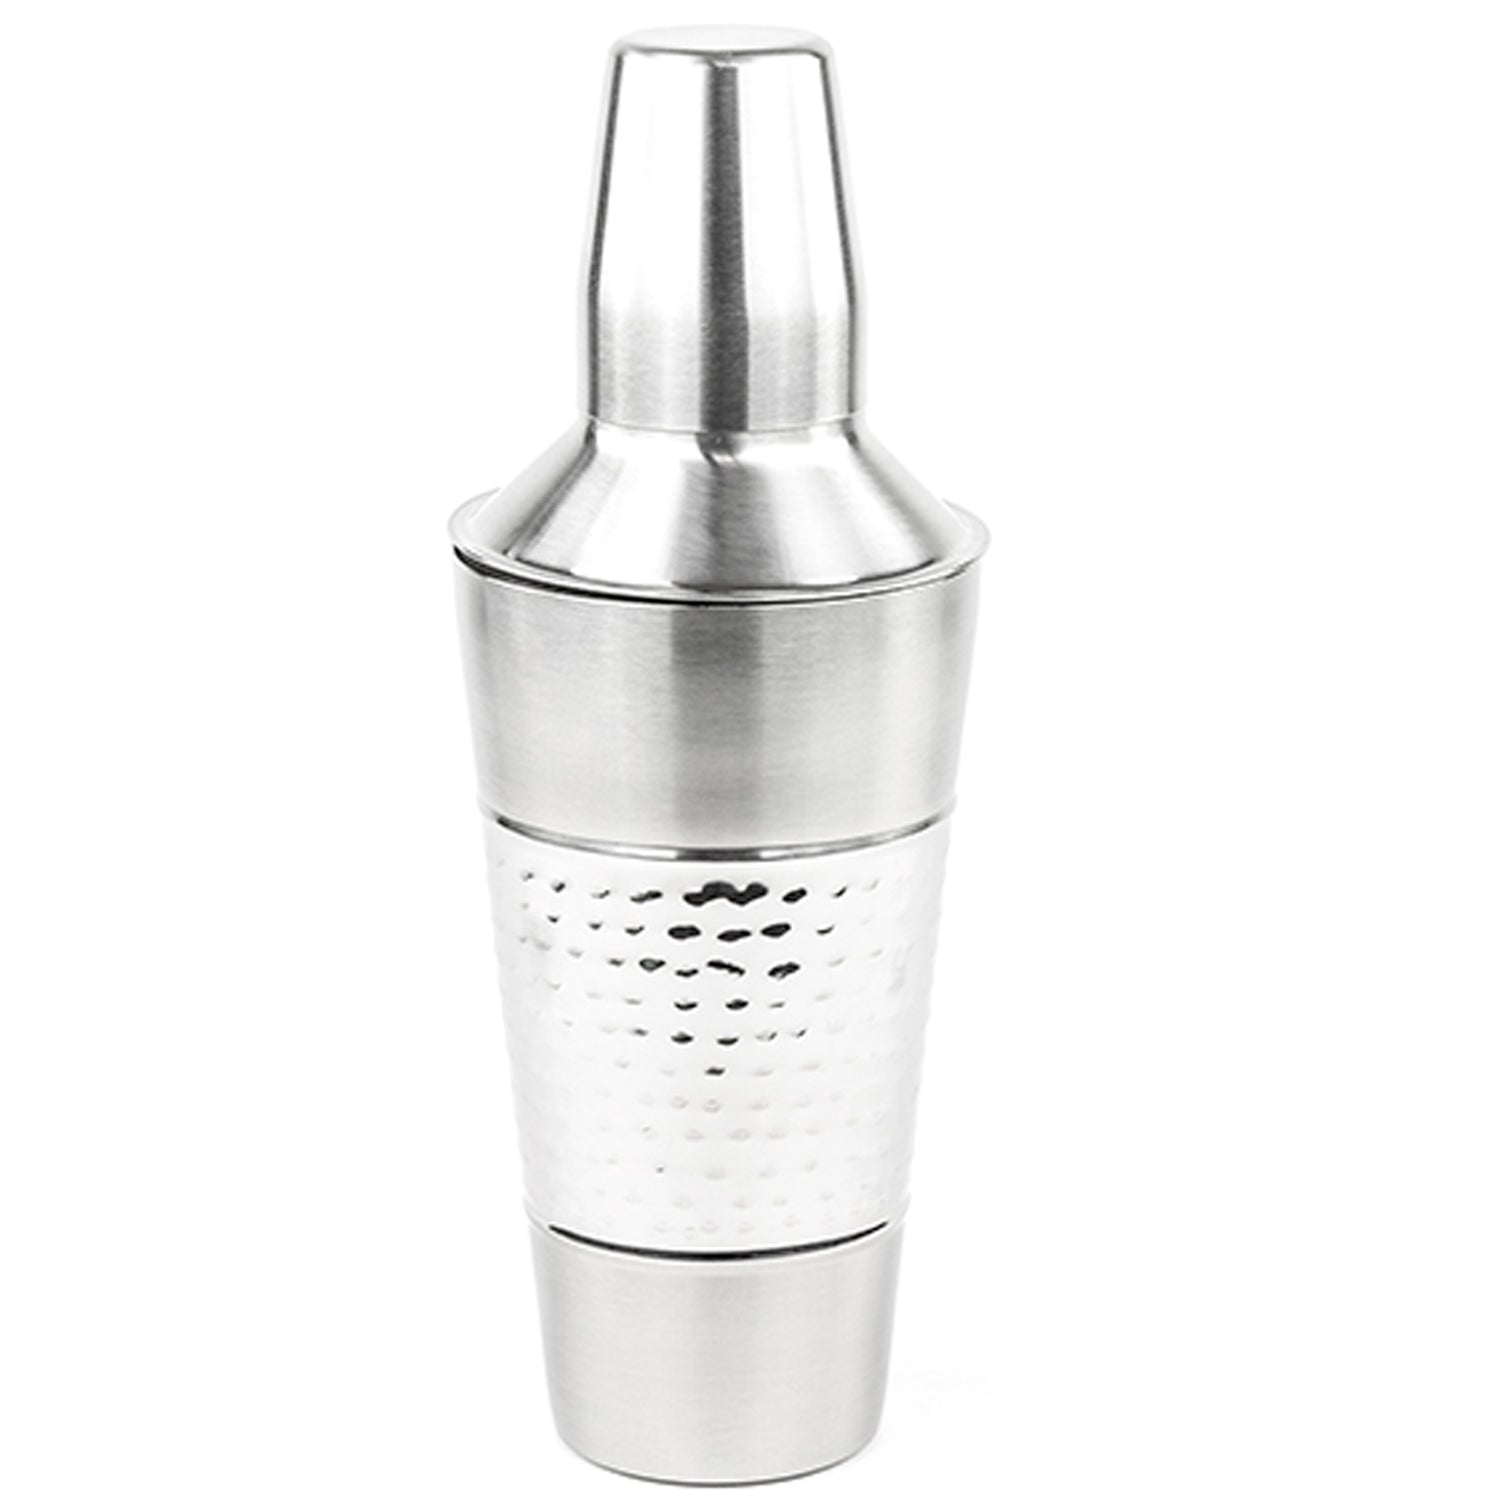 Stainless Steel Cocktail Mixer - Tornado Cocktail Shaker with Jigger Cap and Strainer - 25 Oz